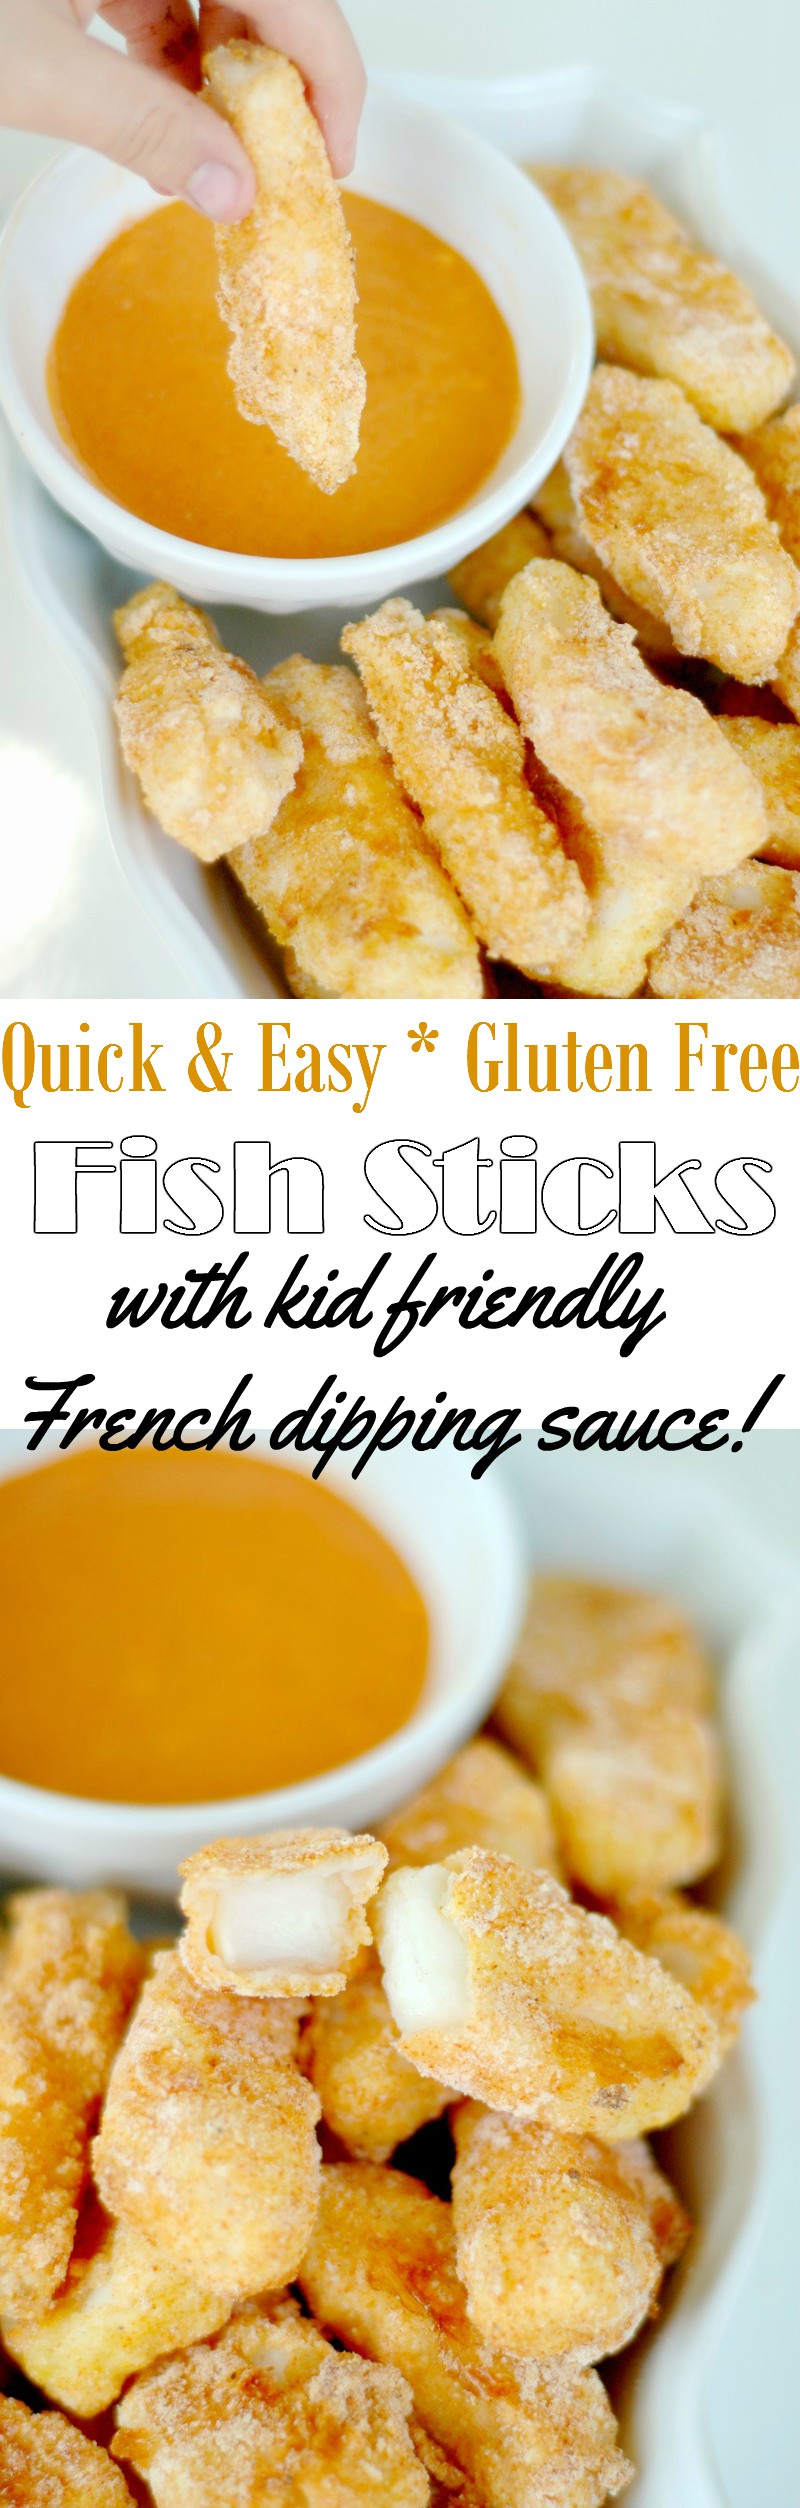 Quick & Easy Gluten Free Fish Sticks with Kid Friendly French Dipping Sauce :: The ultimate kid friendly fish prep! Crispy, flavorful, and gluten free!